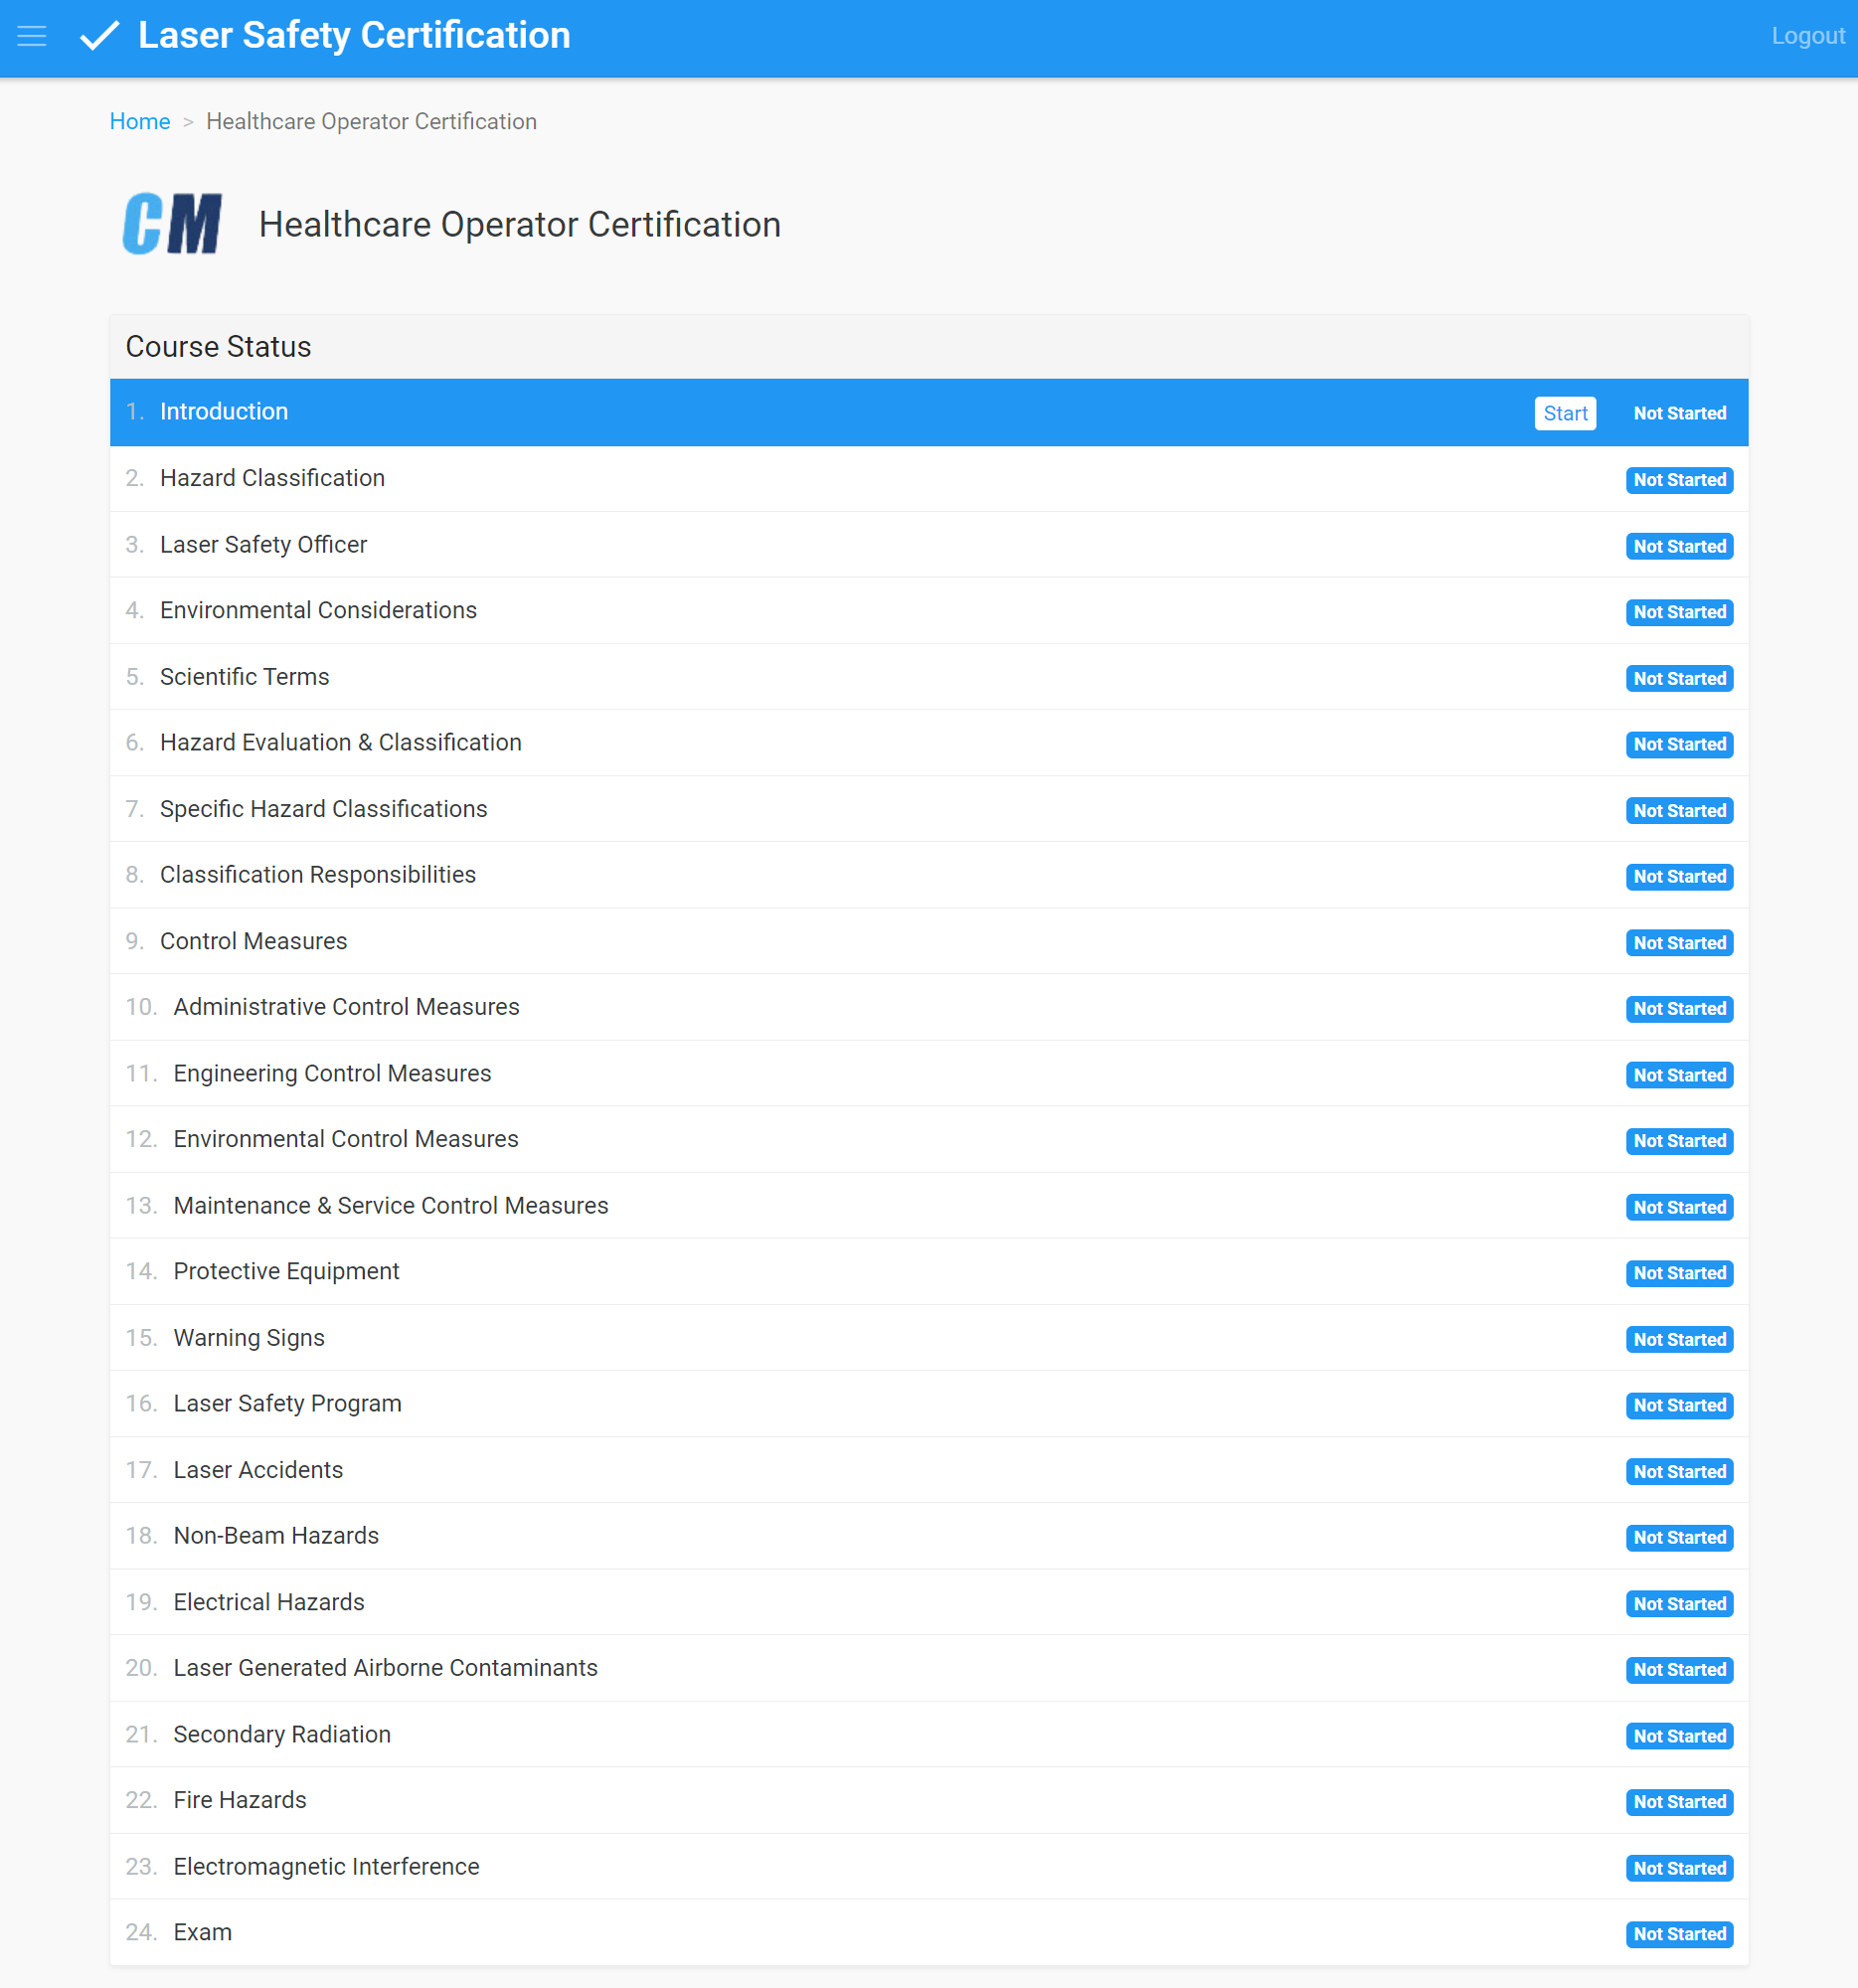 A screenshot of the laser safety certification page.